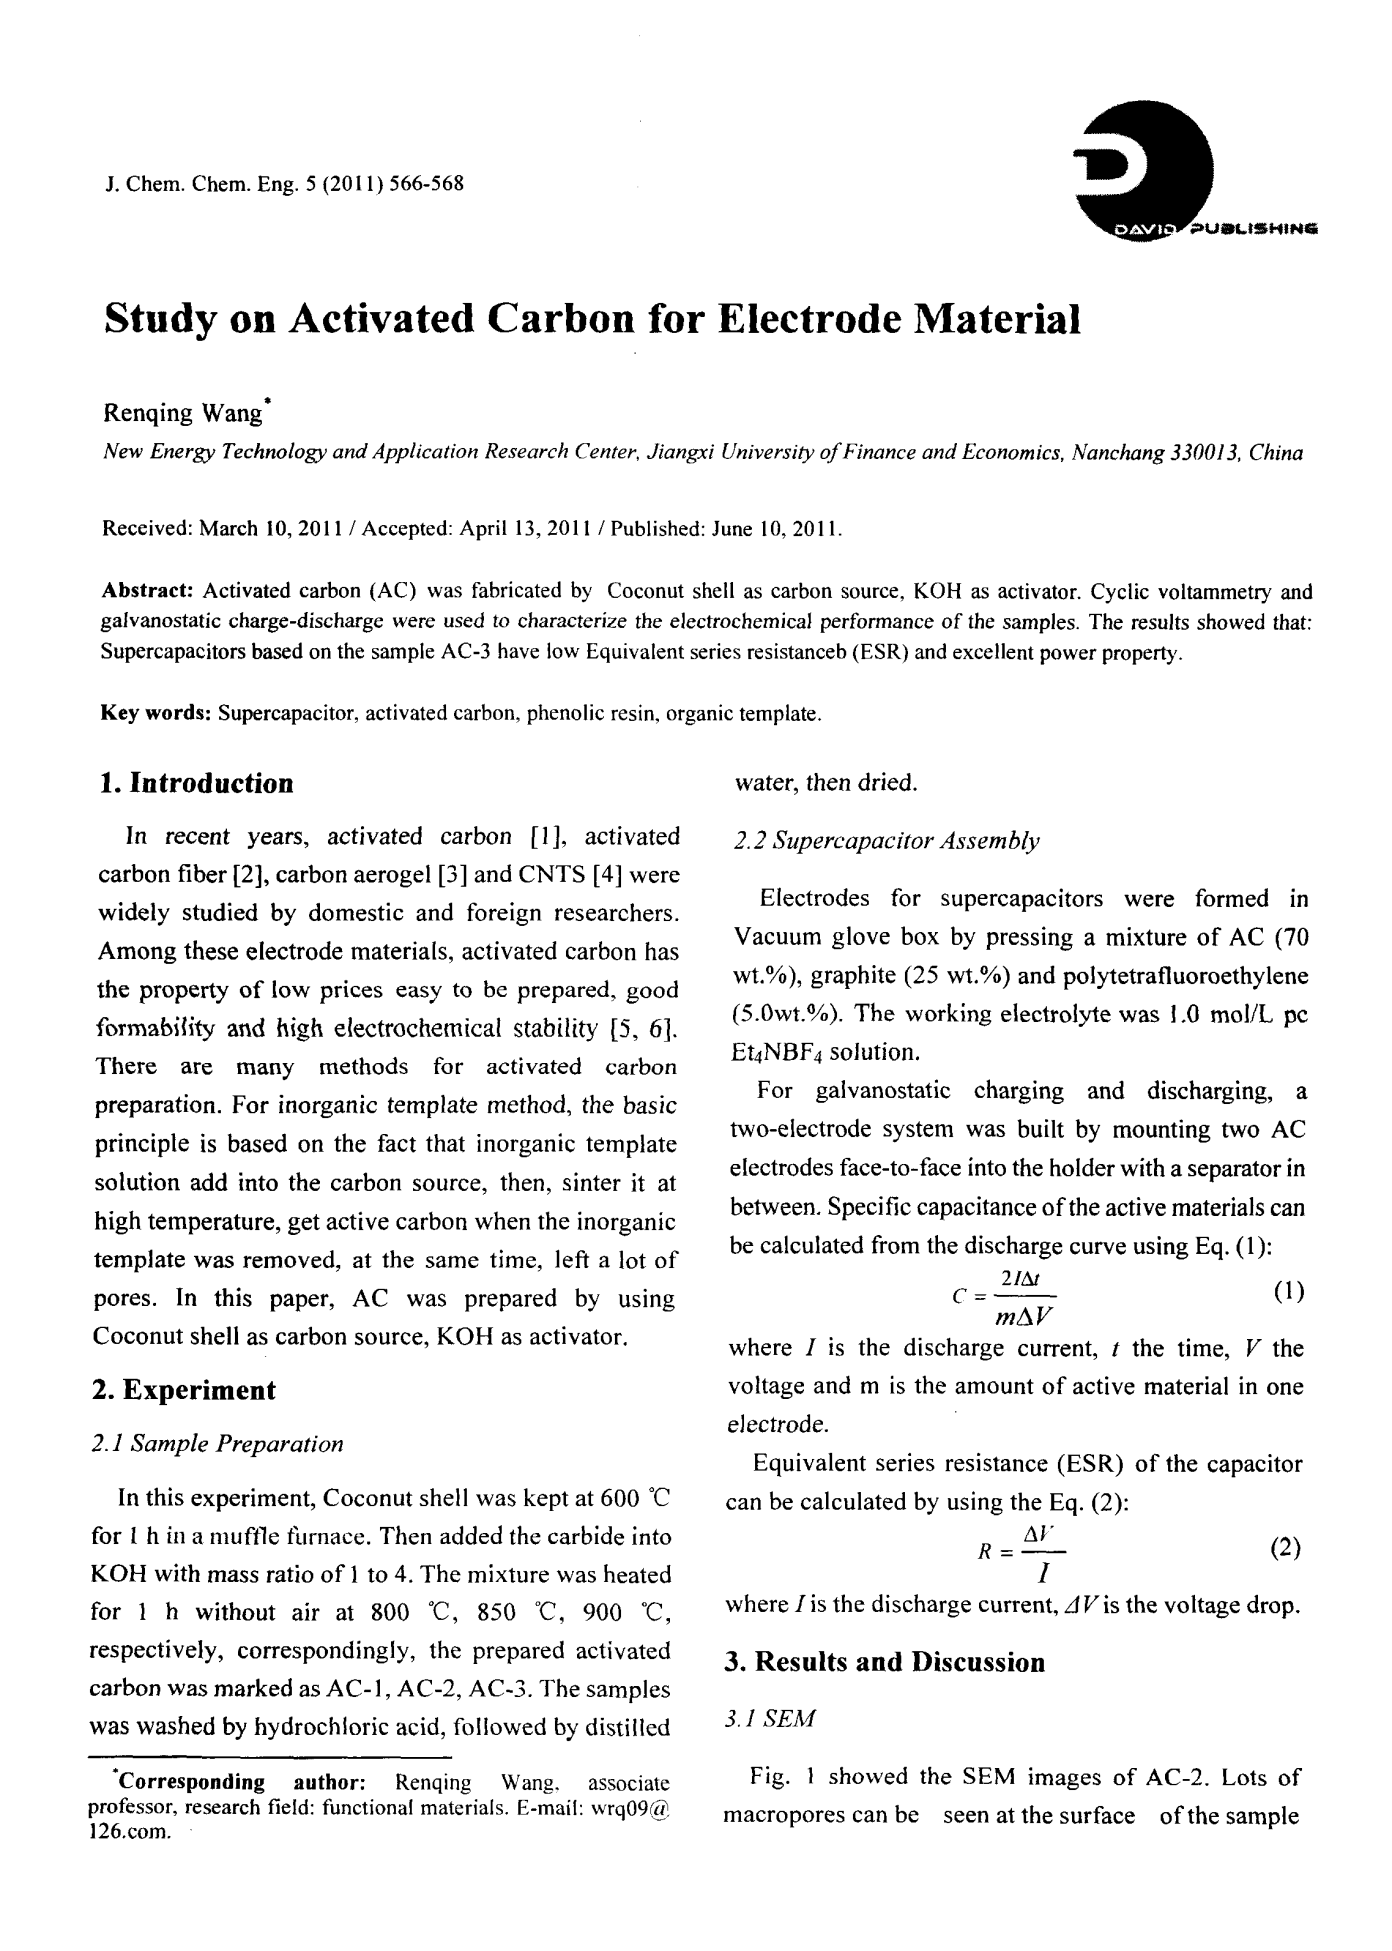 Study on Activated Carbon for Electrode Material